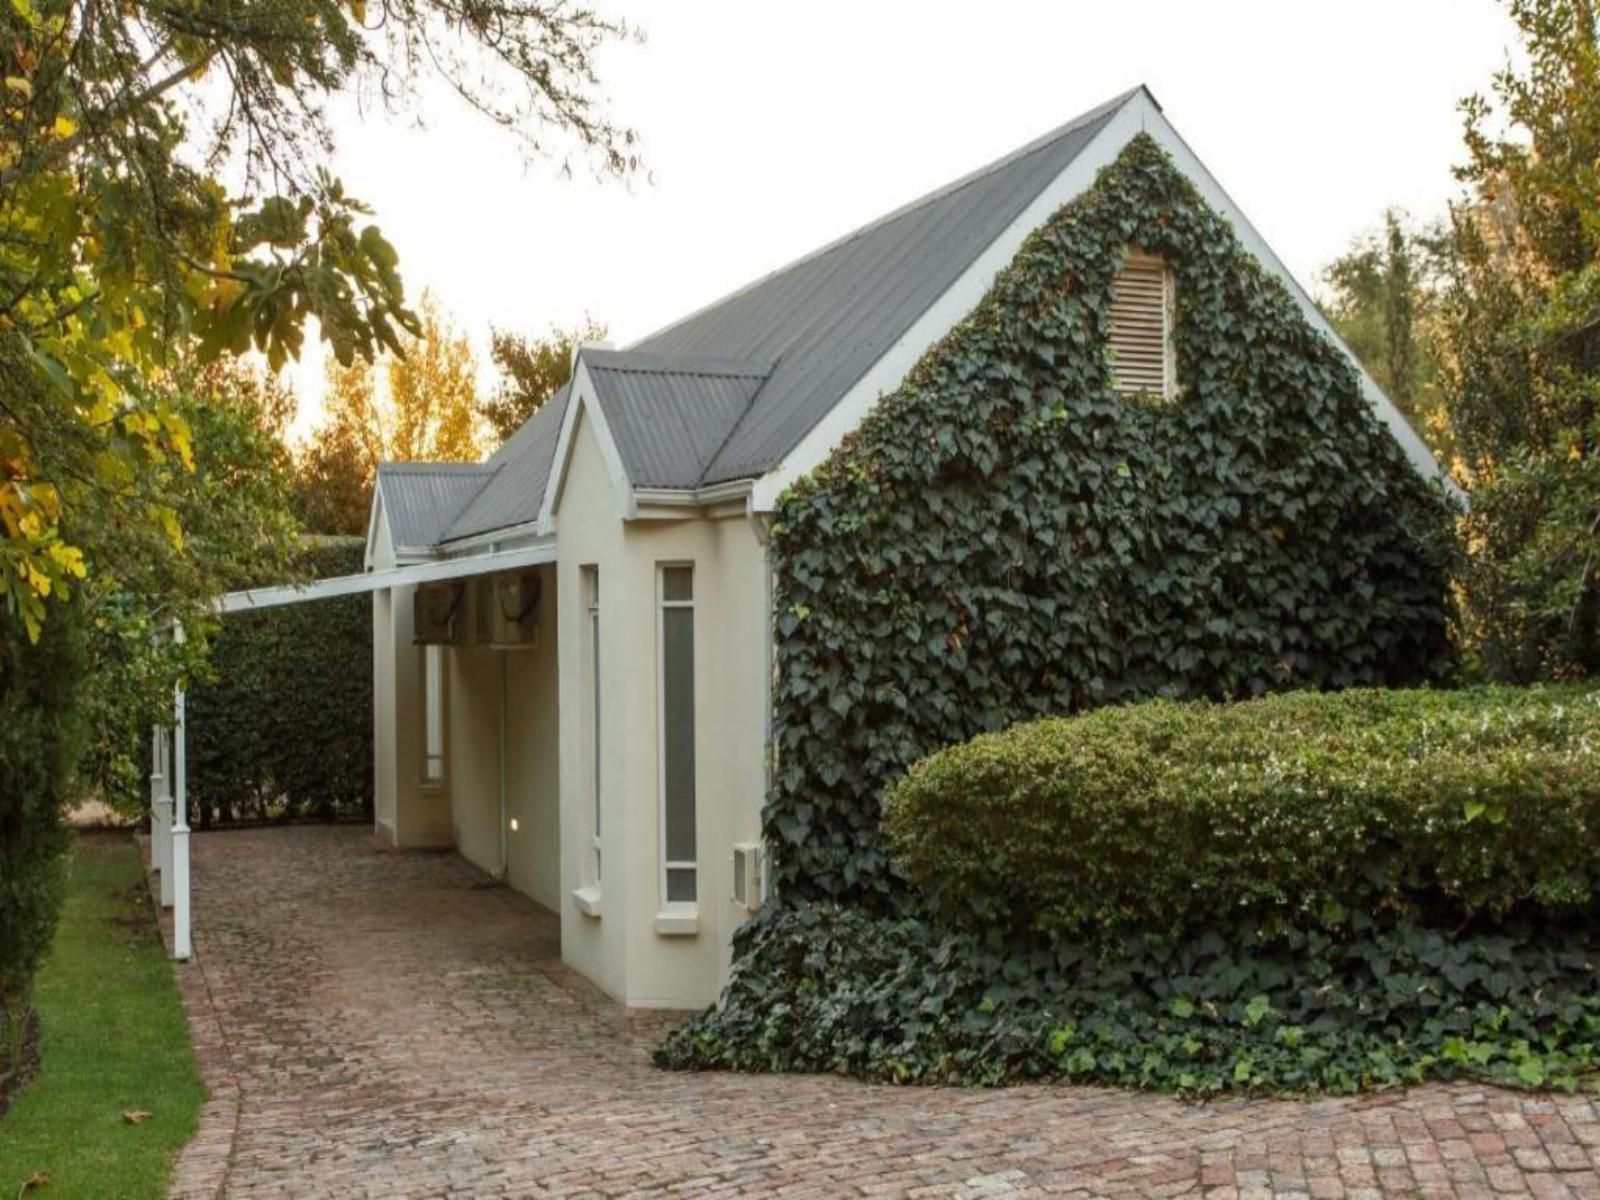 Rosenhof Country House Oudtshoorn Western Cape South Africa House, Building, Architecture, Garden, Nature, Plant